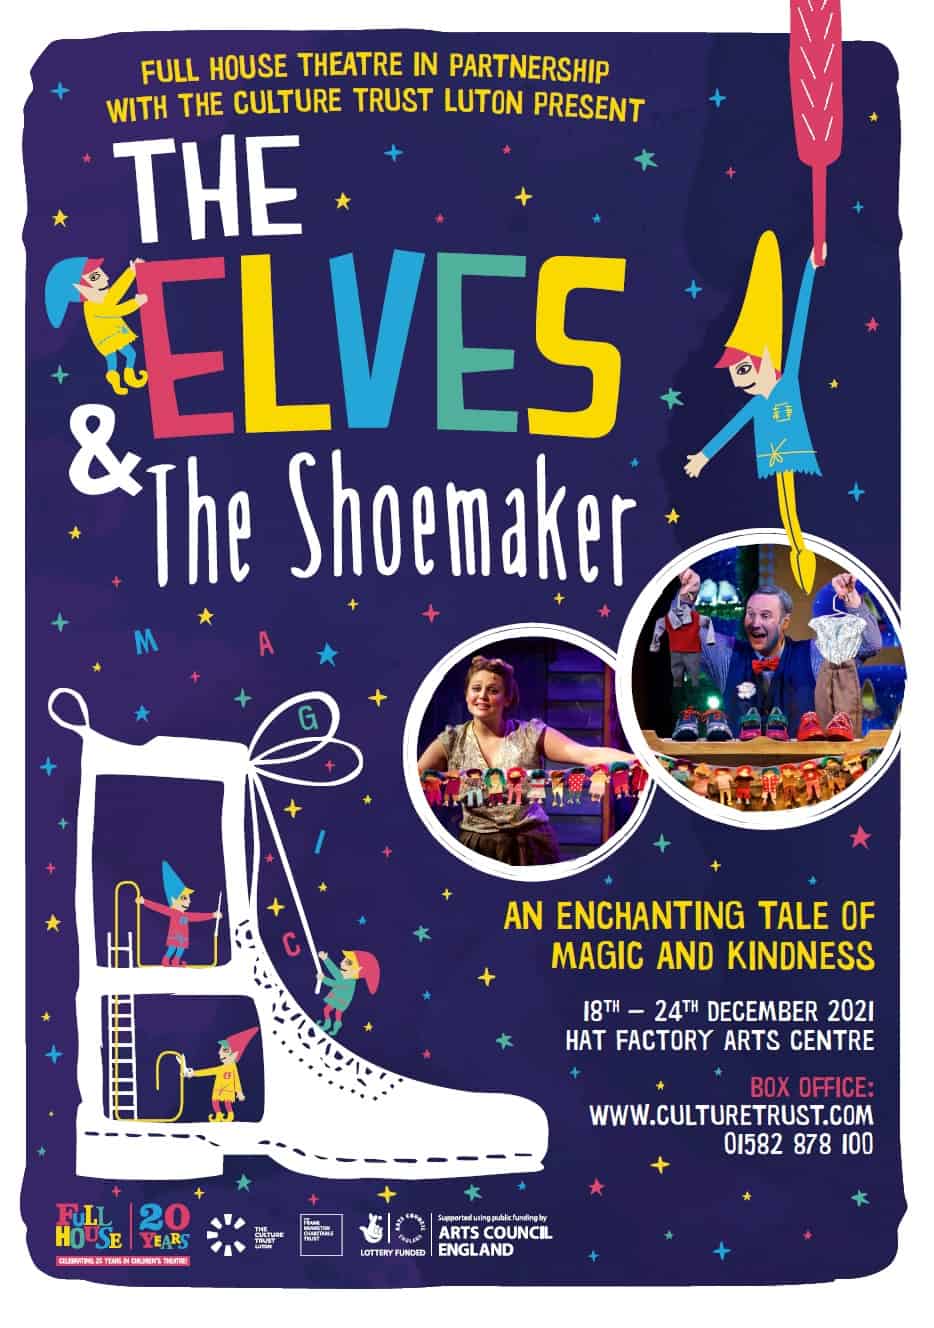 The Elves and the Shoemaker - BSL Interpreted Performance